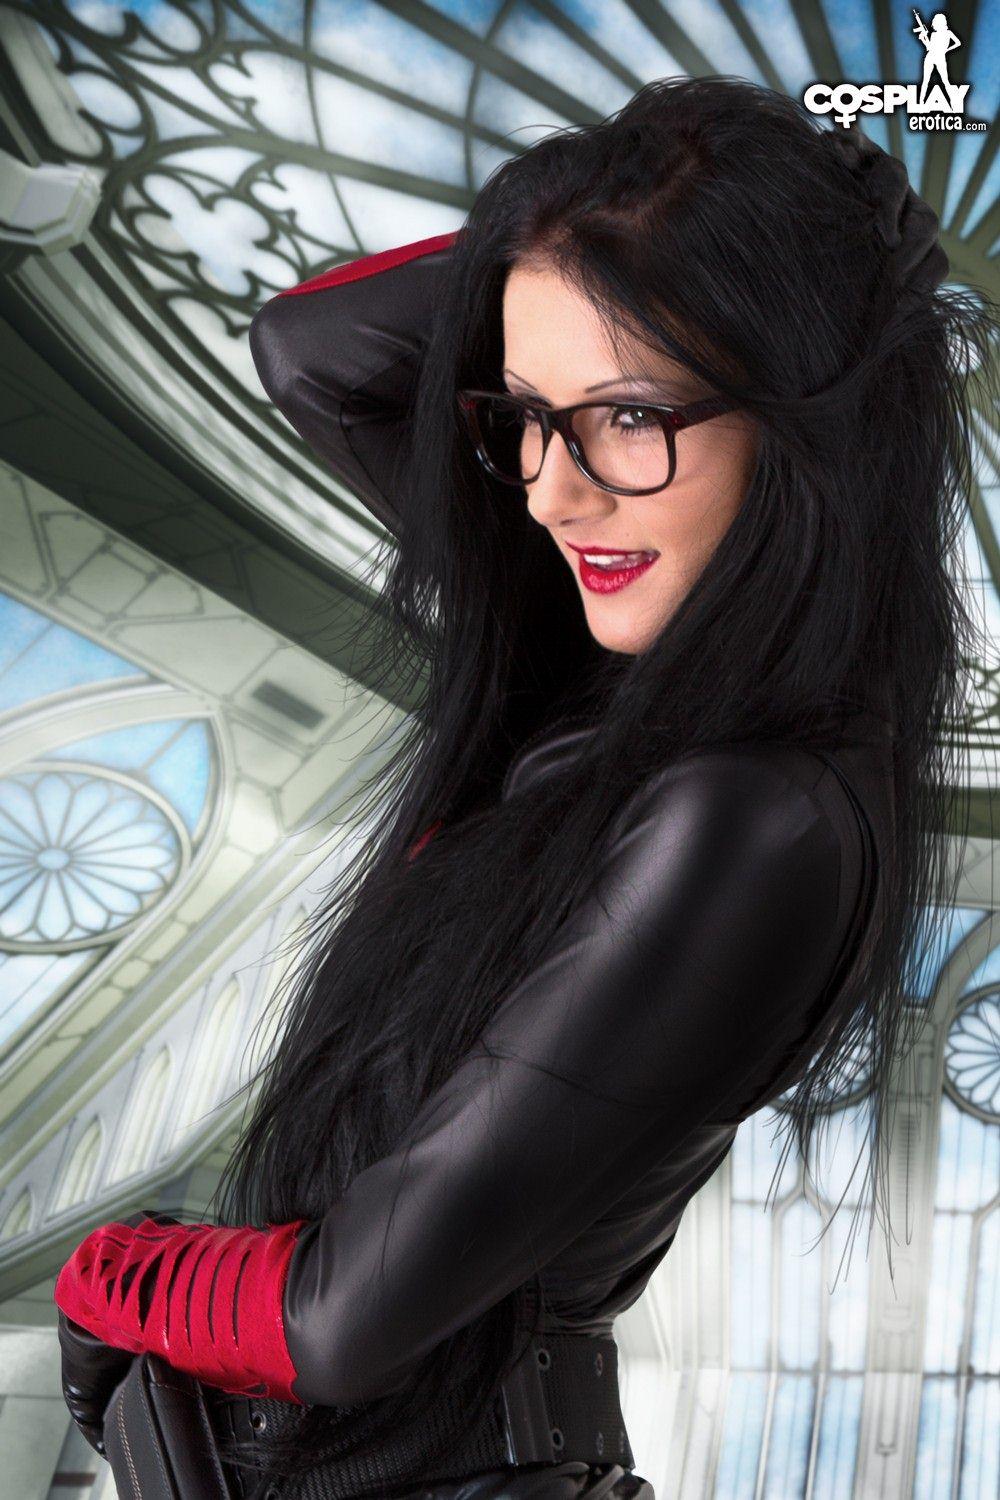 Pictures of hot geek girl Zorah dressed as Baroness #60210546